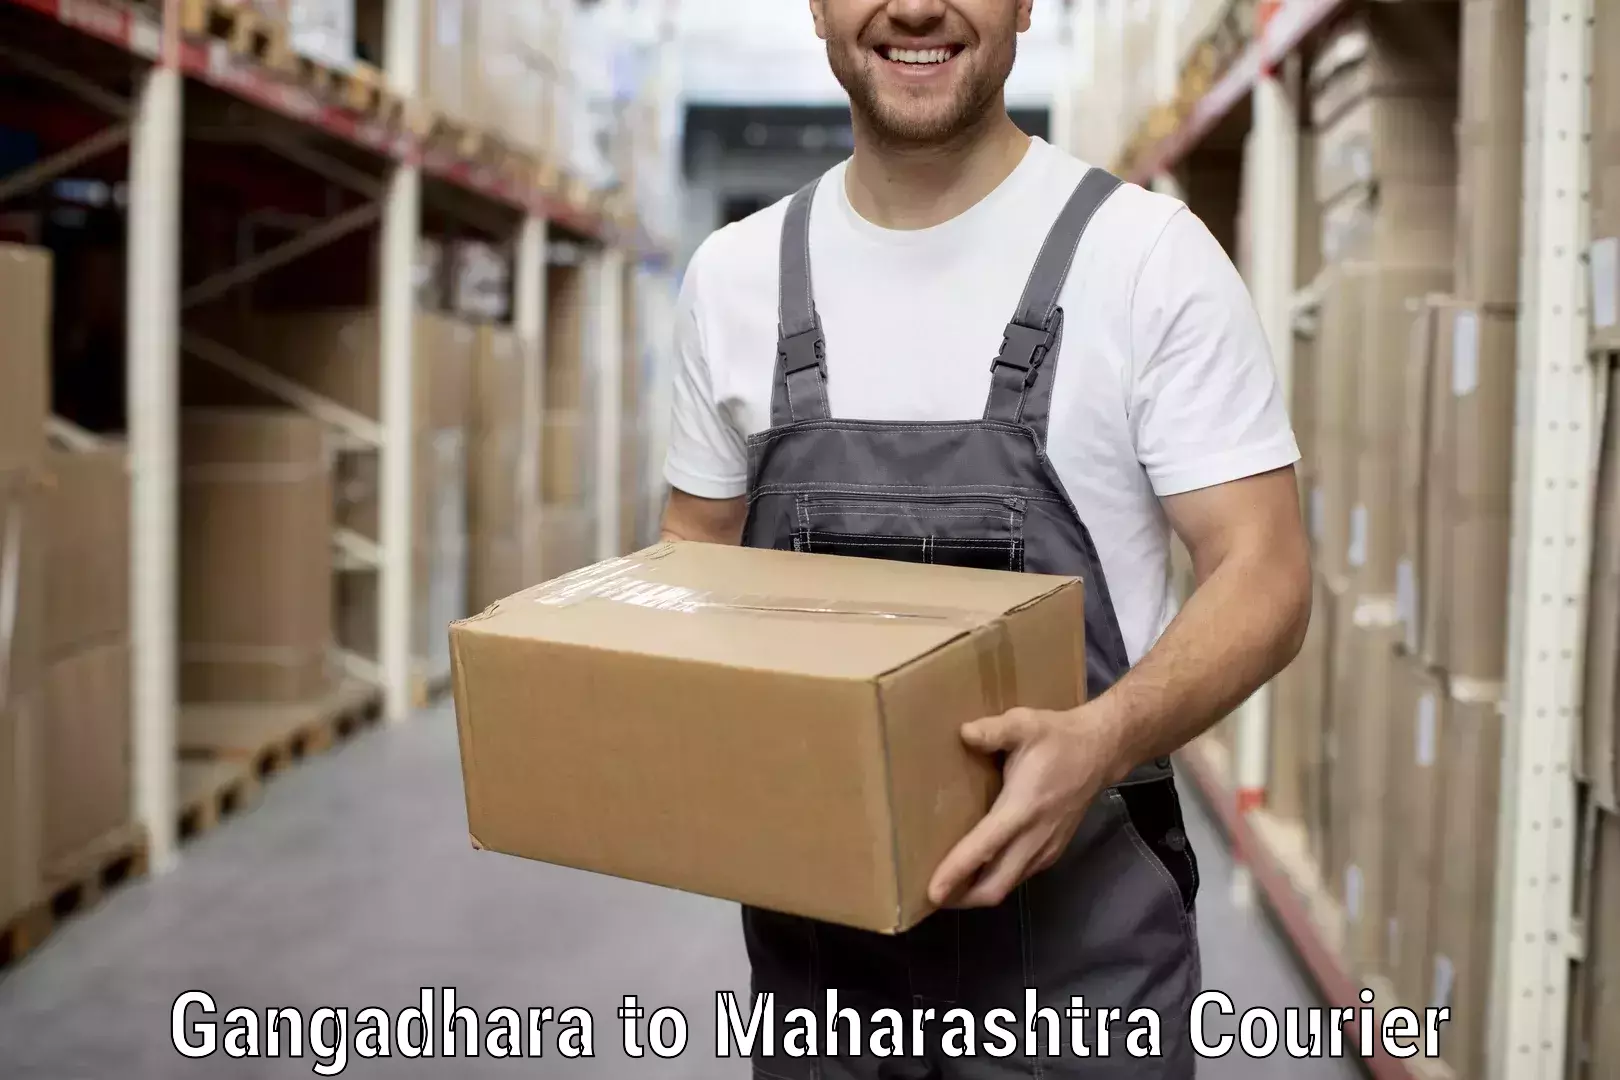 Furniture moving specialists in Gangadhara to Maharashtra